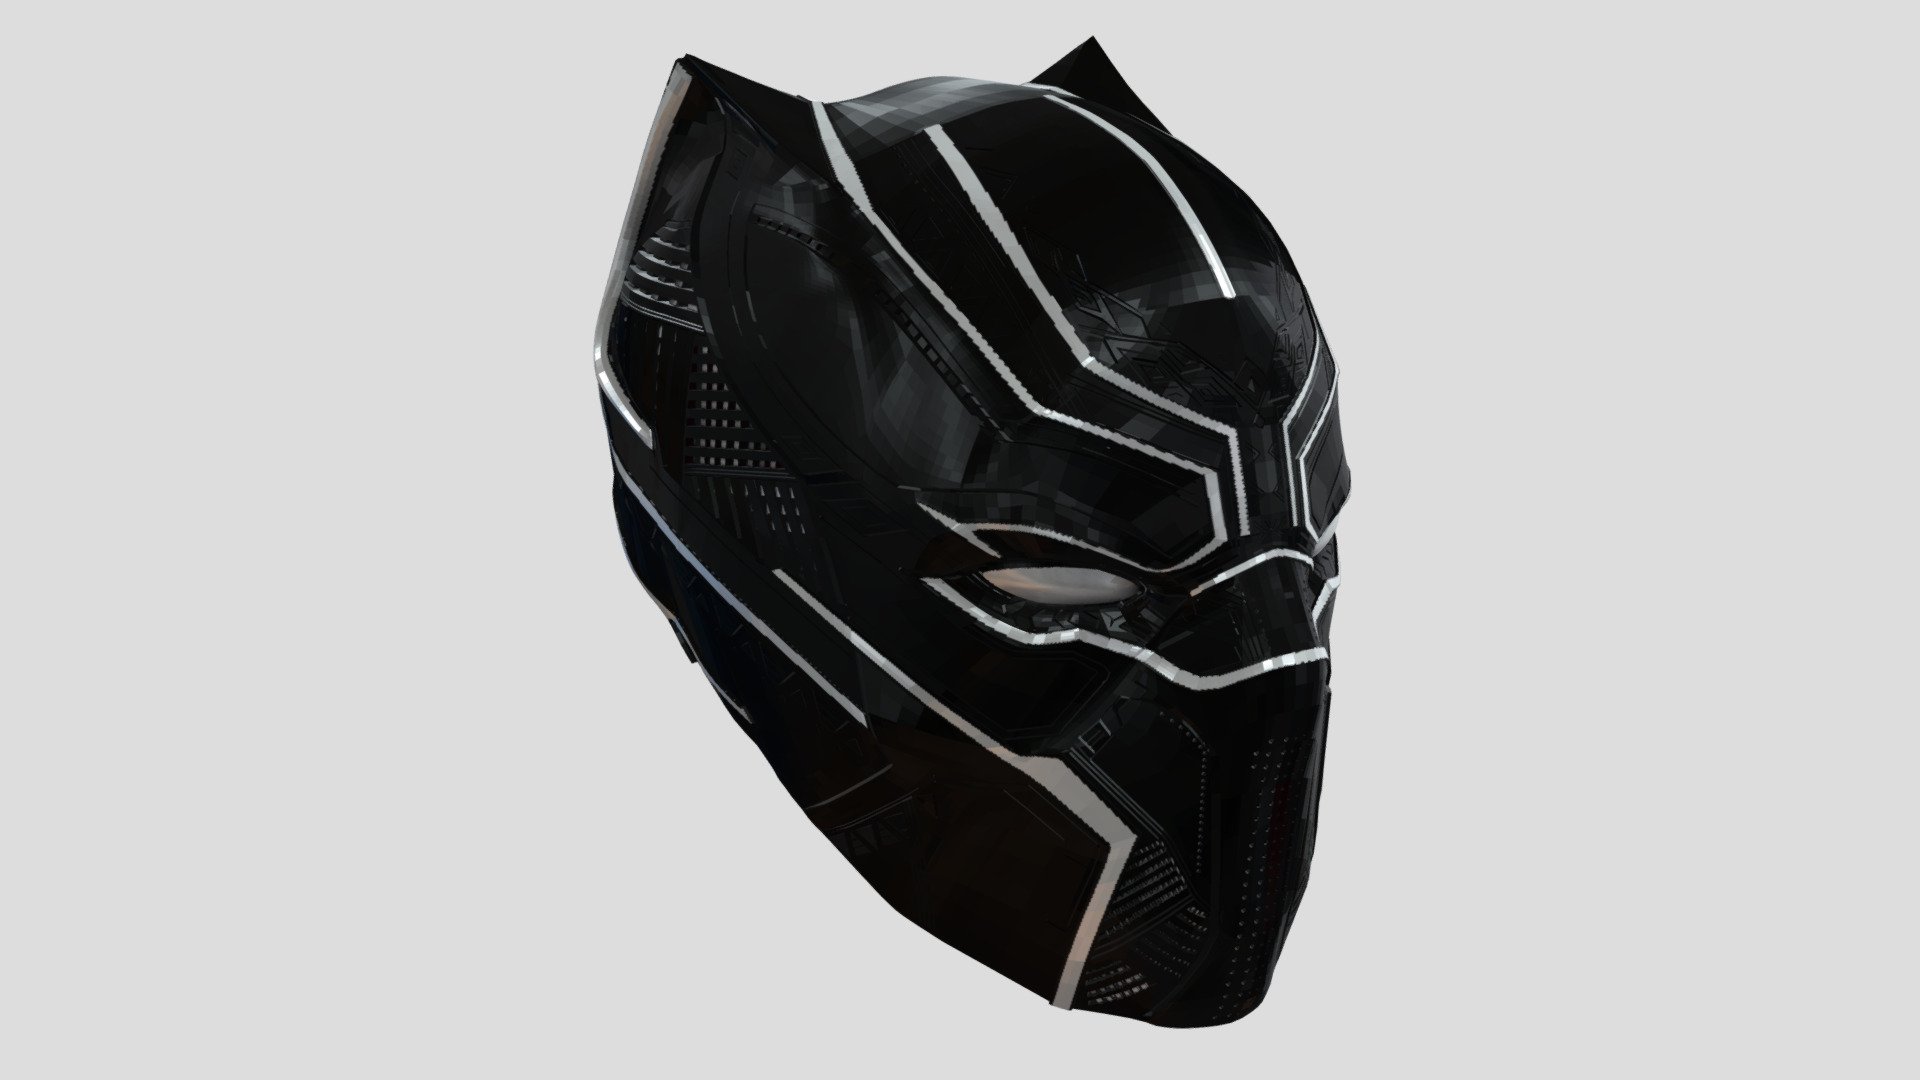 the one from the beginning of Black Panther and Cap3 Civil War

Modeled in Blender circa 2018

Original format is fbx - Black Panther helmet - Download Free 3D model by atomicwest 3d model